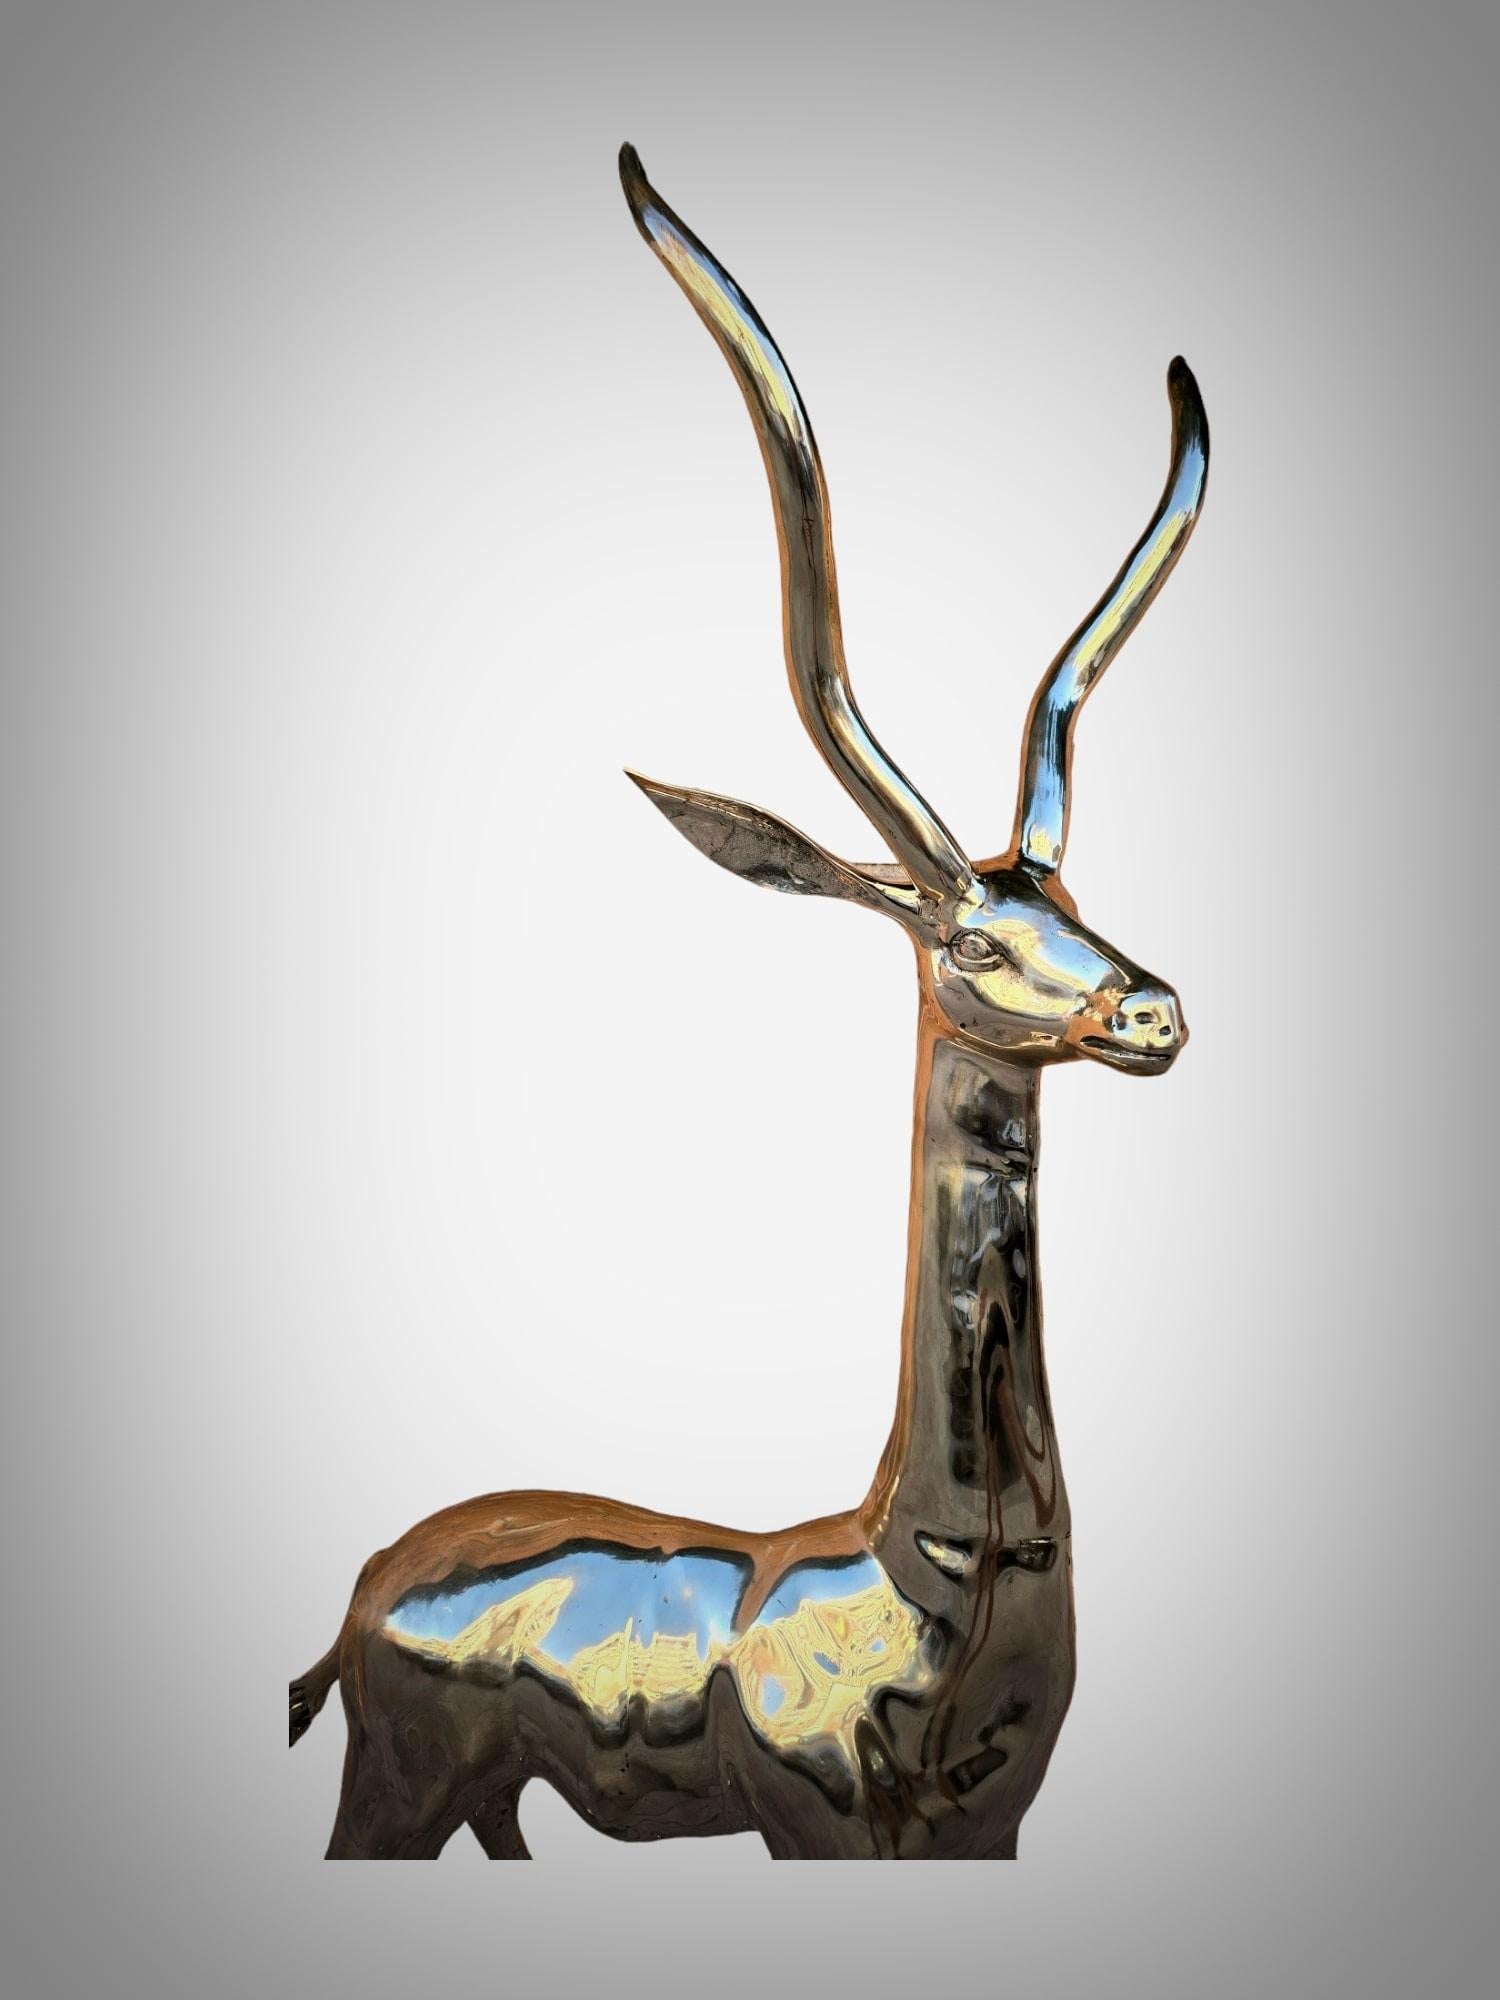 Exquisite Polished Bronze Sculpture: Lifesize Antelope from the 1950s For Sale 5